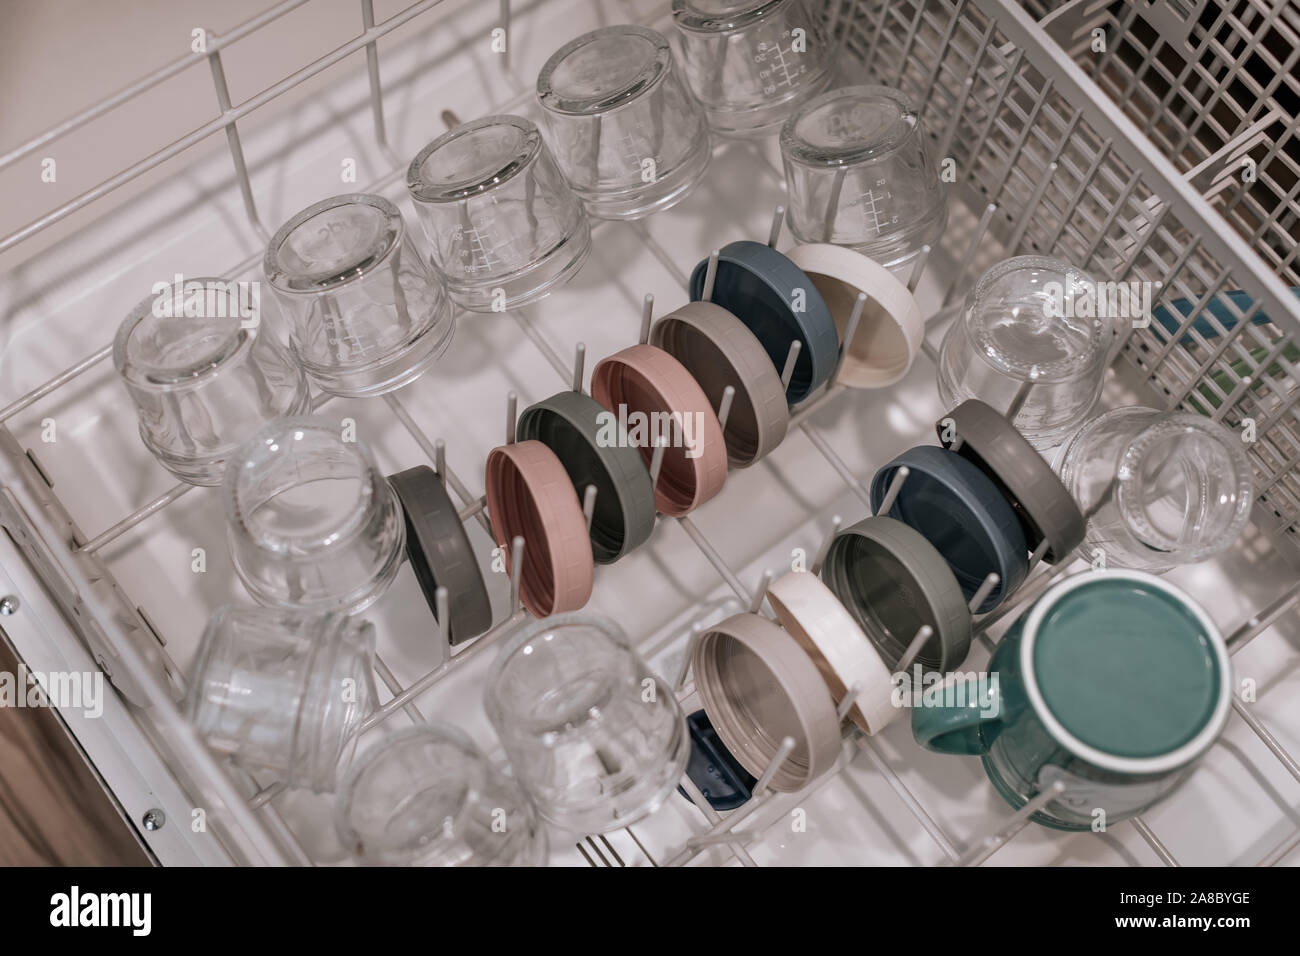 Glass Baby Food Storage Containers in dishwasher Stock Photo